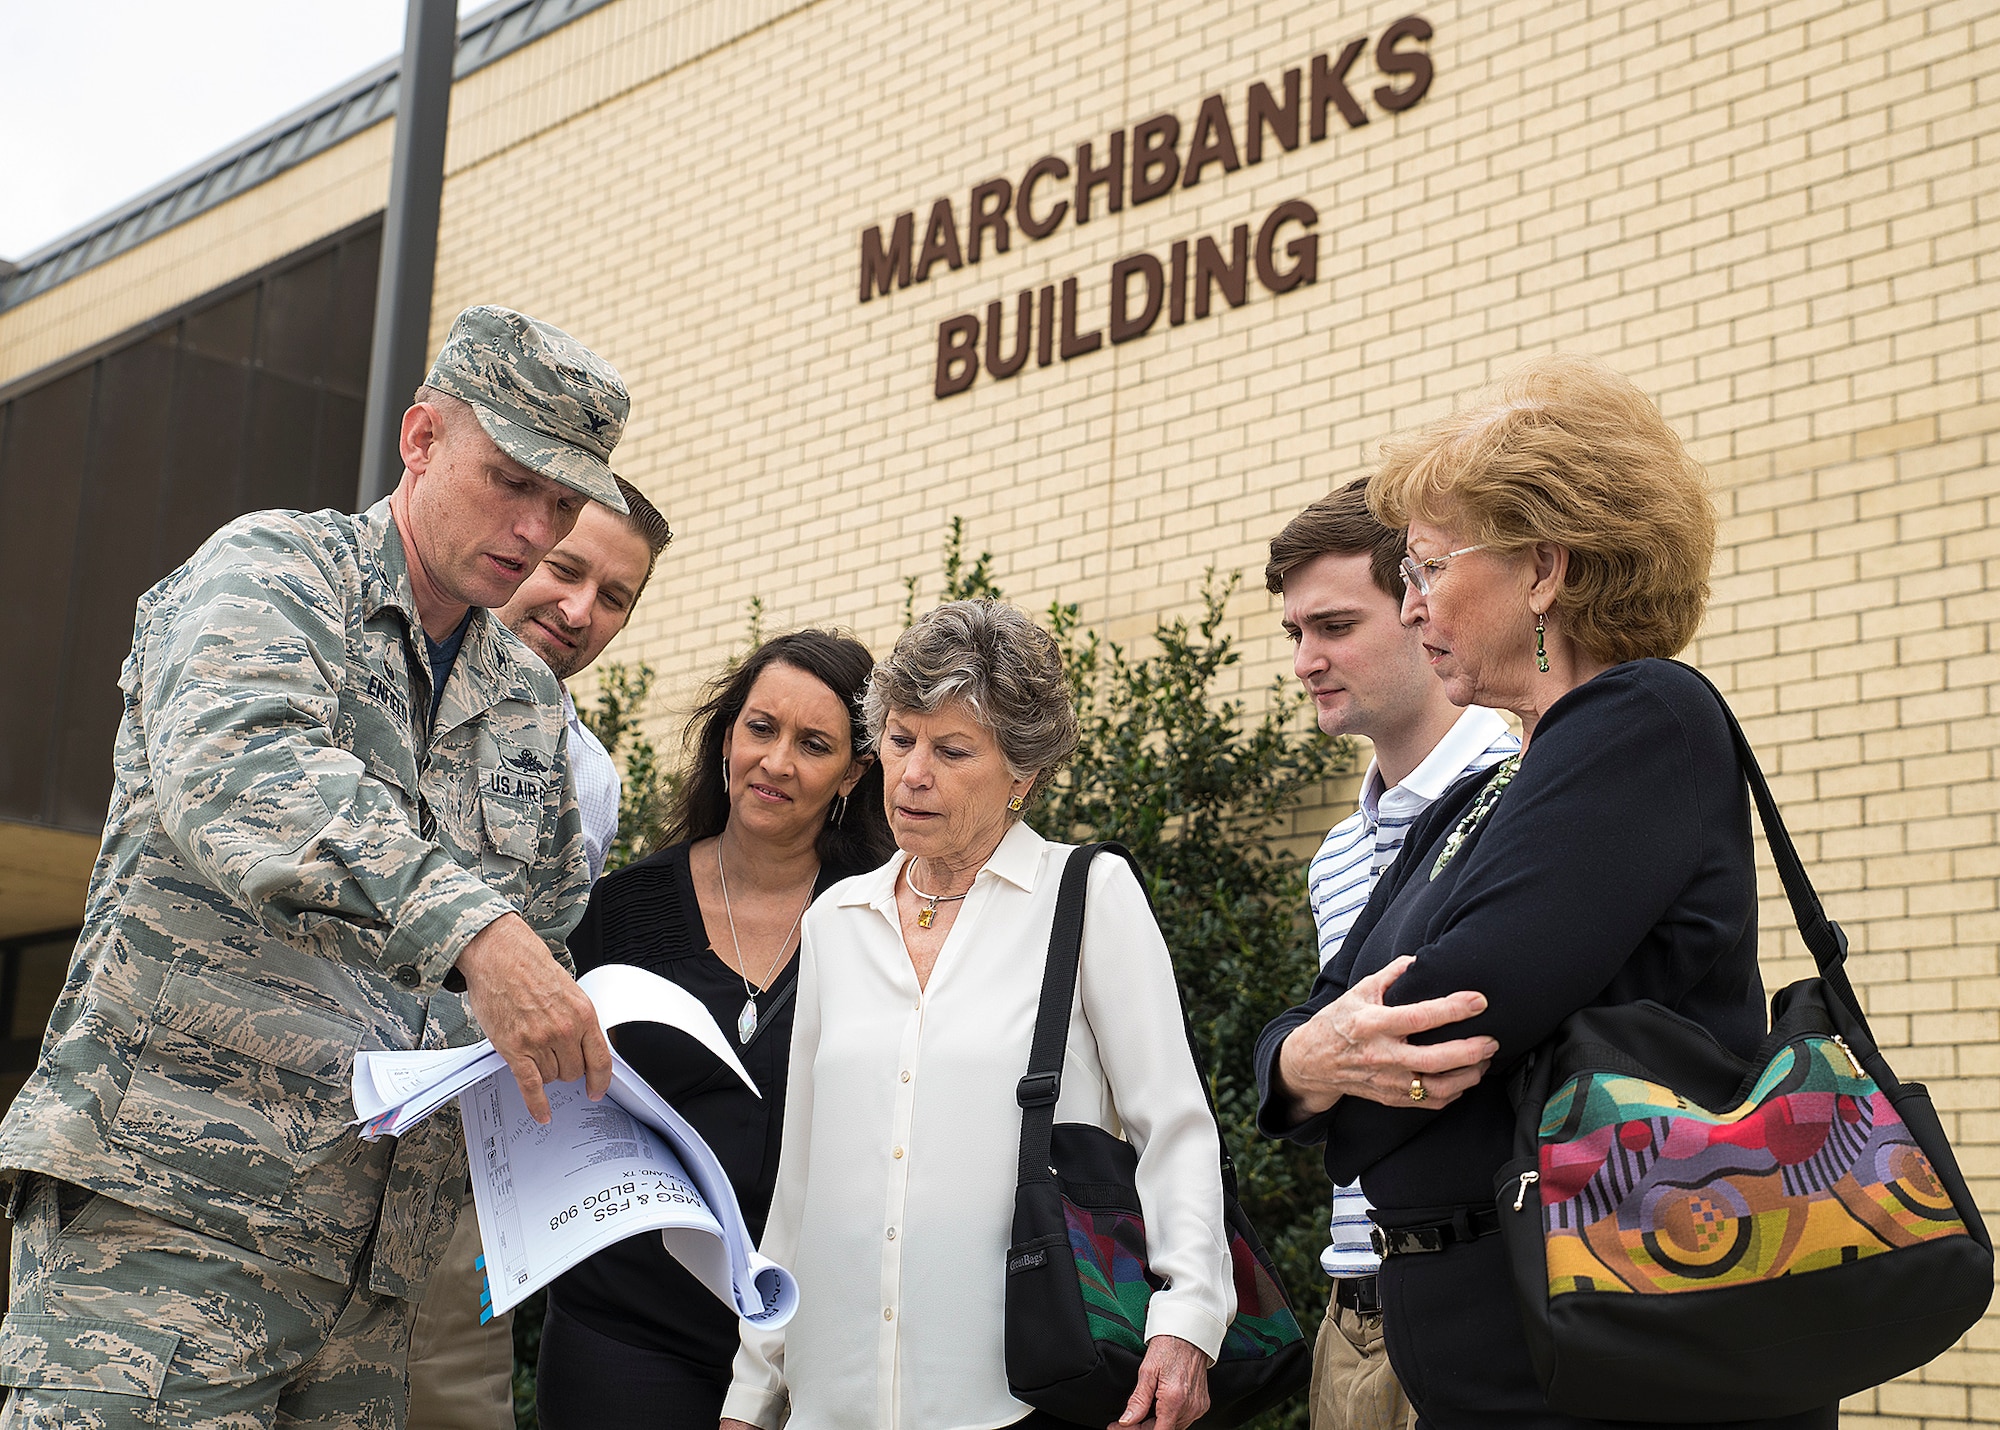 Col. David Enfield, 433rd Mission Support Group commander, shows Peggy Marchbanks, the new-construction blueprints of the Marchbanks Building March 17, 2017 at Joint Base San Antonio-Lackland, Texas. Peggy Marchbanks  was accompanied by her son Tobin Marchbanks, daughter-inlaw Lorisha Marchbanks, grandson Colin Marchbanks, and sister Nancy Richter. She is the widow of Maj.Gen. Tom E. Marchbanks, Jr. , the first chief, Air Force Reserve, and former 433rd Airlift Wing commander. (U.S.  Air Force photo by Benjamin Faske)